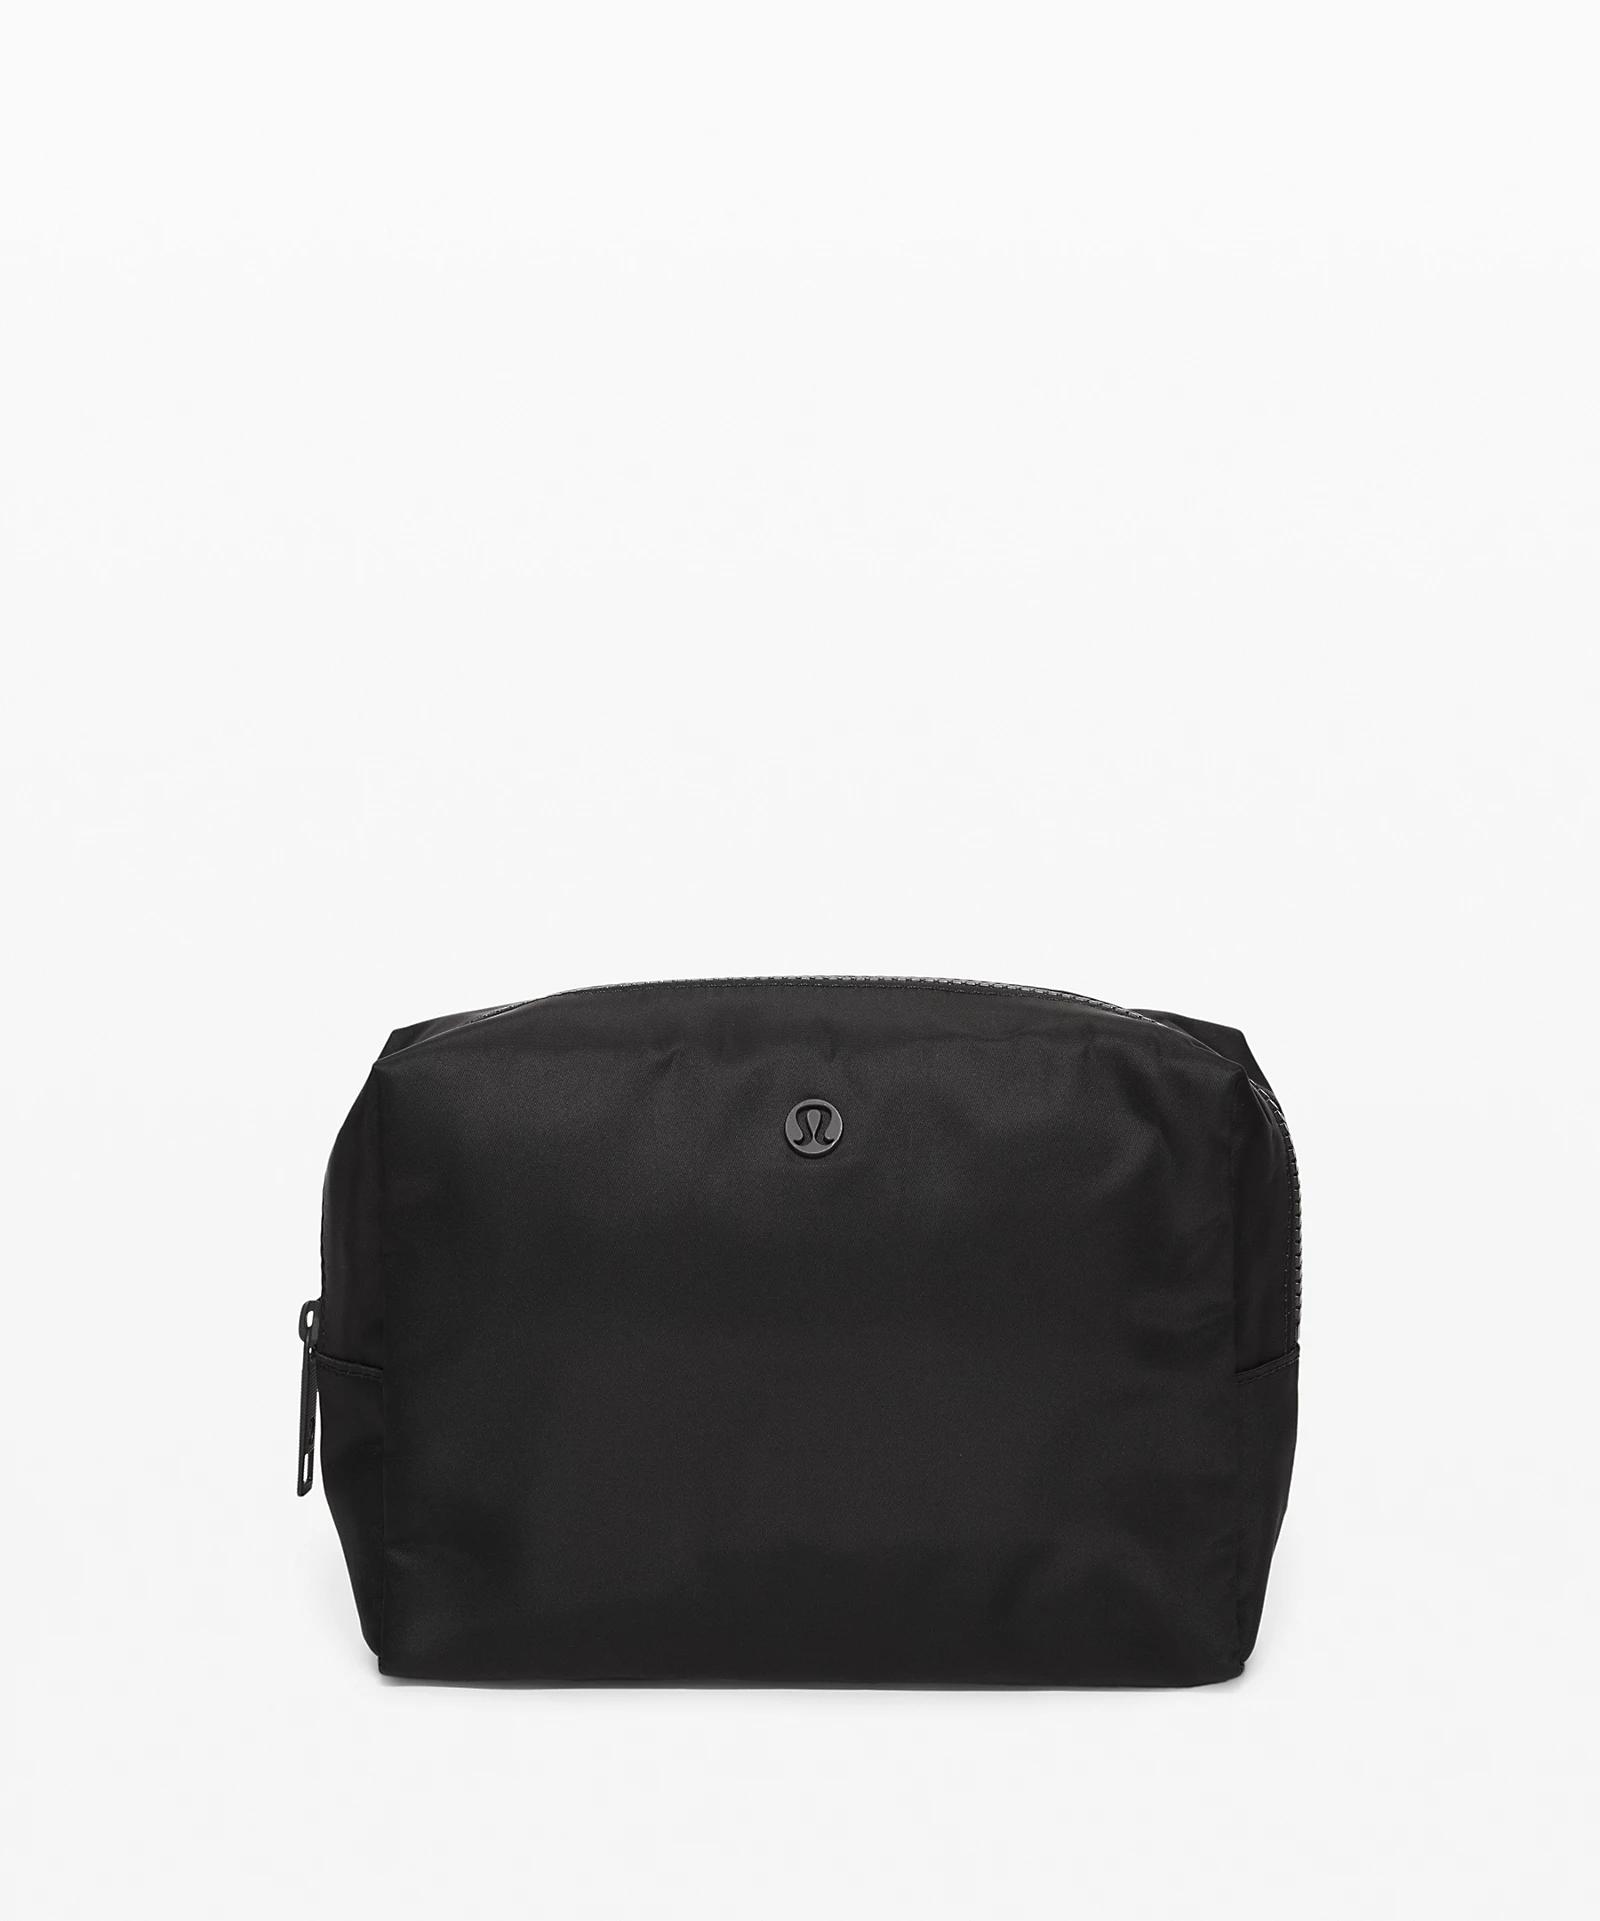 Lululemon + All Your Small Things Pouch 4L